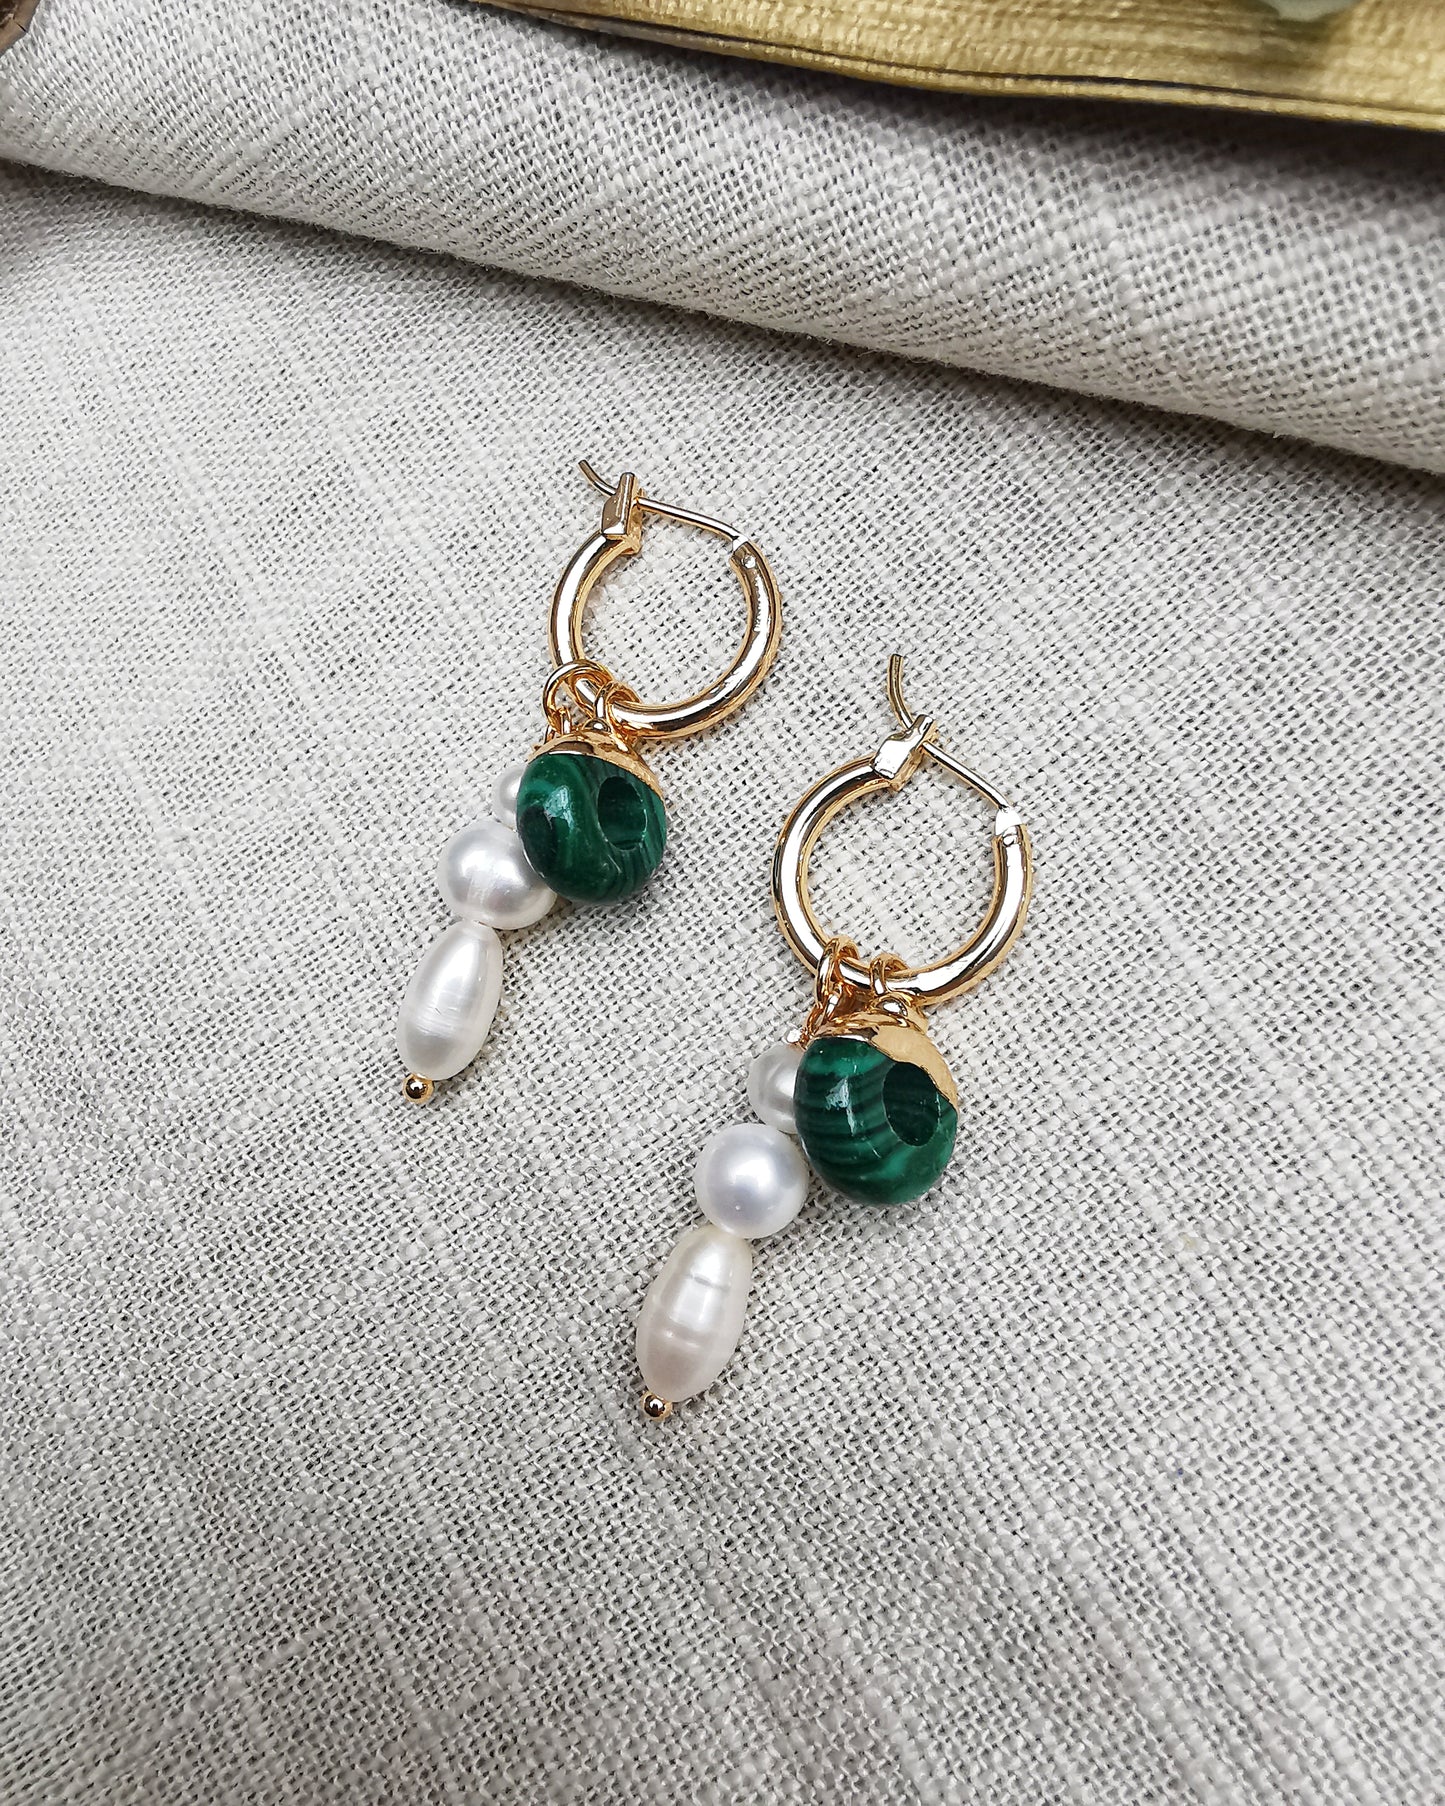 Detachable Hoop Earrings with Freshwater Pearl and Malachite.